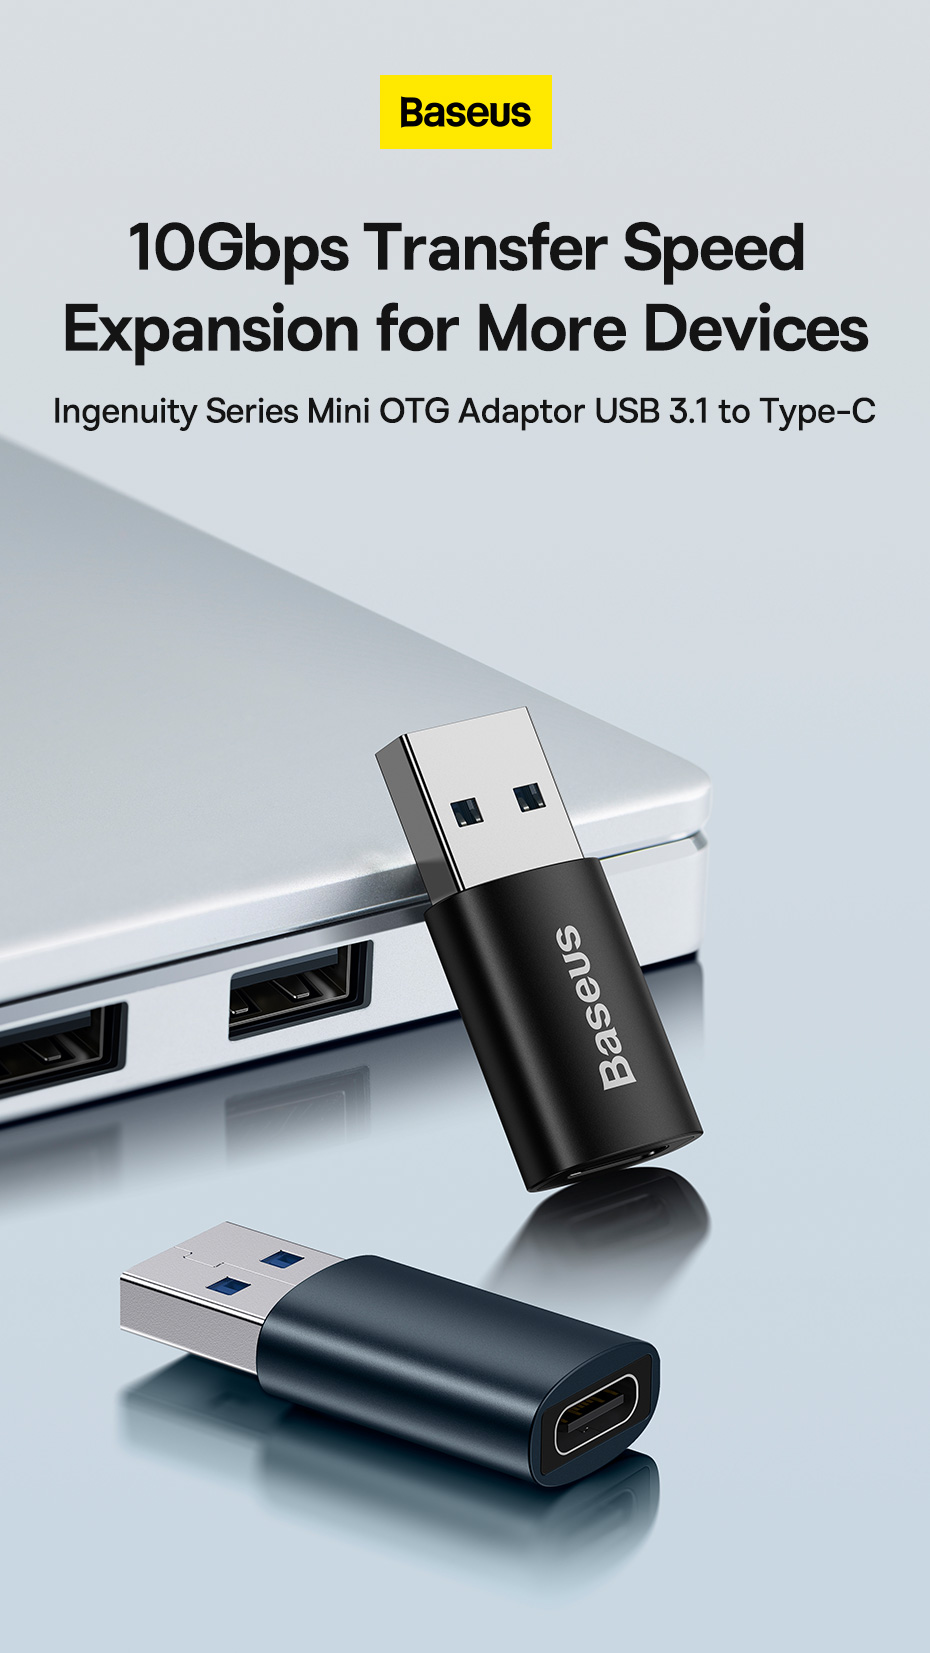 Baseus-USB31-Male-to-Type-C-Female-Adapter-10Gbps-Speed-Transfer-Connector-For-LaptopComputer-1930179-1